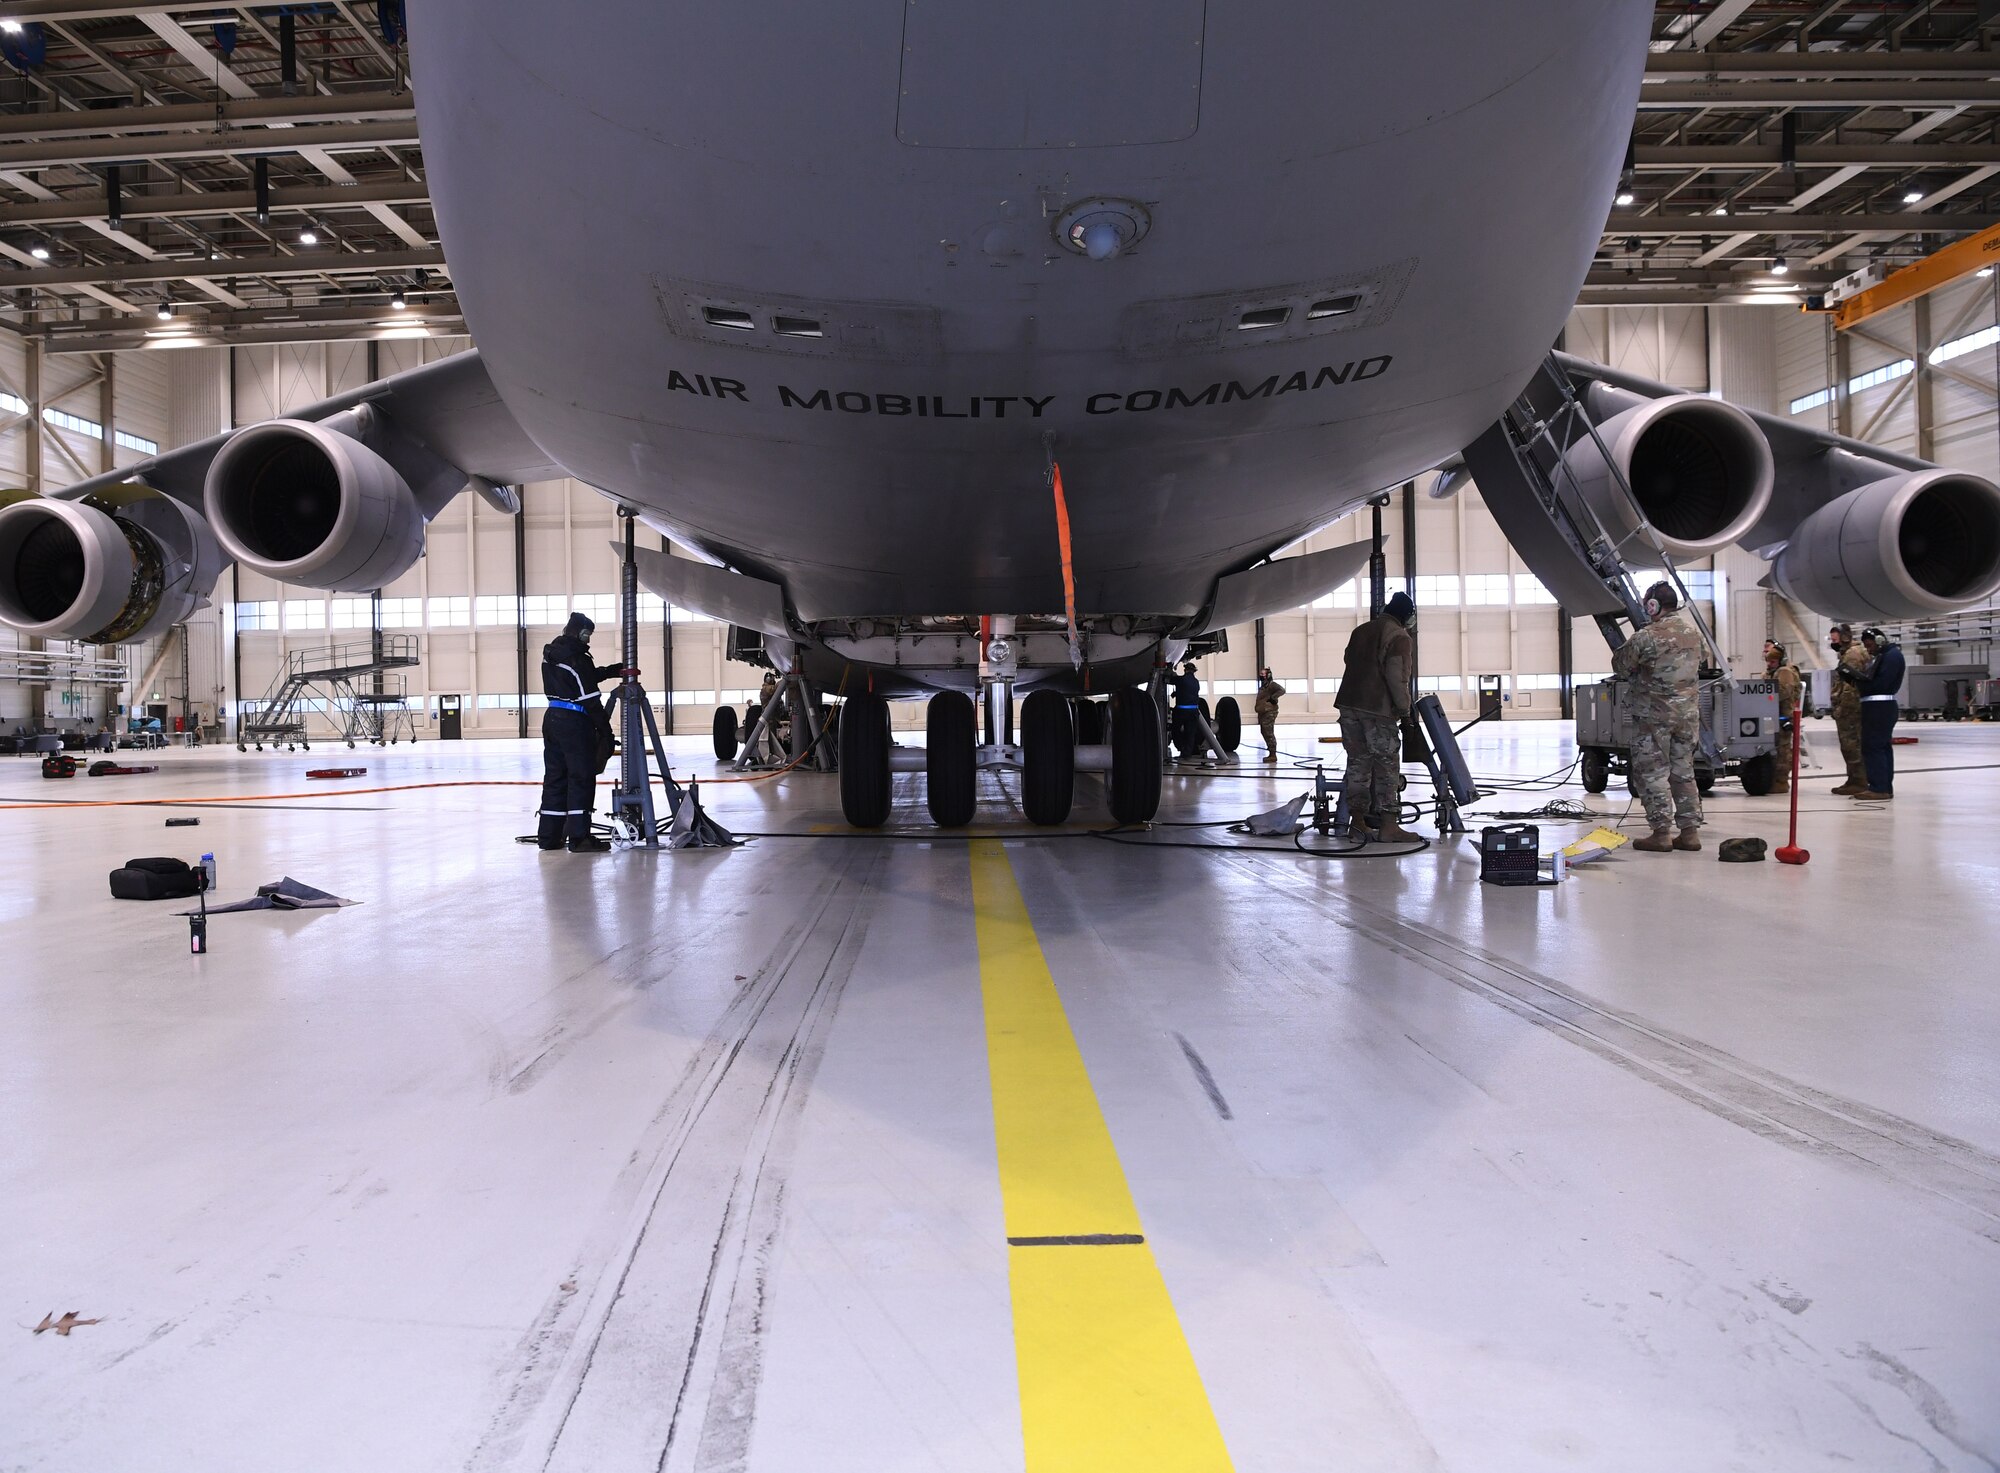 A C-5 Super Galaxy aircraft is placed on aircraft jacks during a 721st Air Mobility Squadron training at Ramstein Air Base, Germany, Dec. 11, 2020. Airmen from Incirlik AB, Turkey, Rota AB, Spain, Spangdahlem AB, Germany, and Ramstein AB attended a training to develop their maintenance proficiency. The 721st Air Mobility Squadron provides command and control, aerial port, and aircraft maintenance in support of the national military strategy to sustain forces worldwide. (U.S. Air Force photo by Senior Airman Thomas Karol)